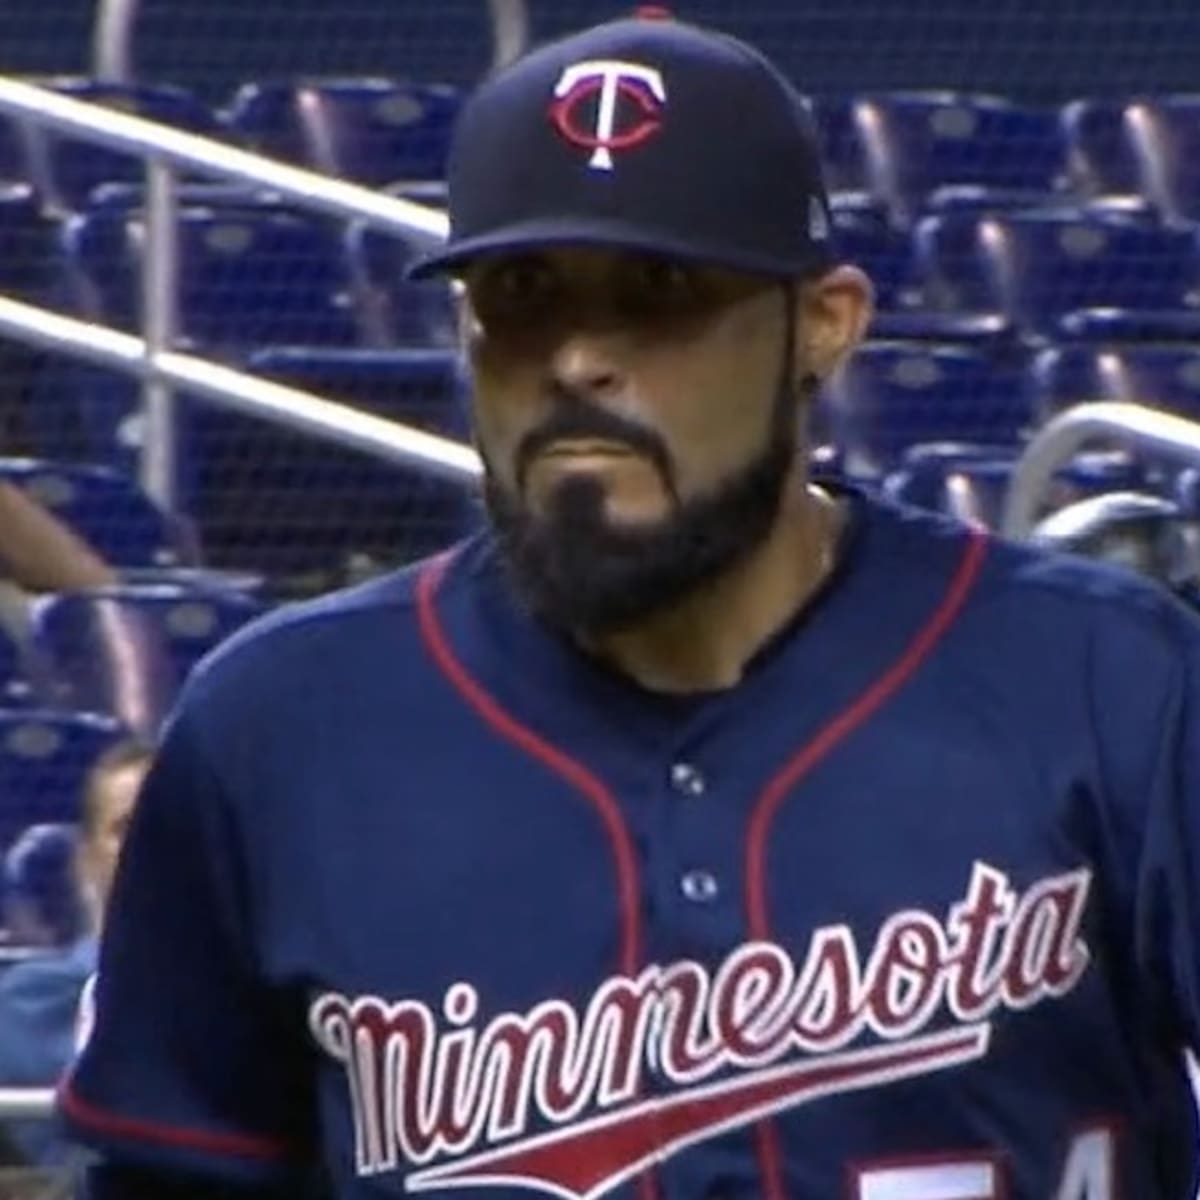 Minnesota Twins - Guess who's back? We've signed Sergio Romo to a